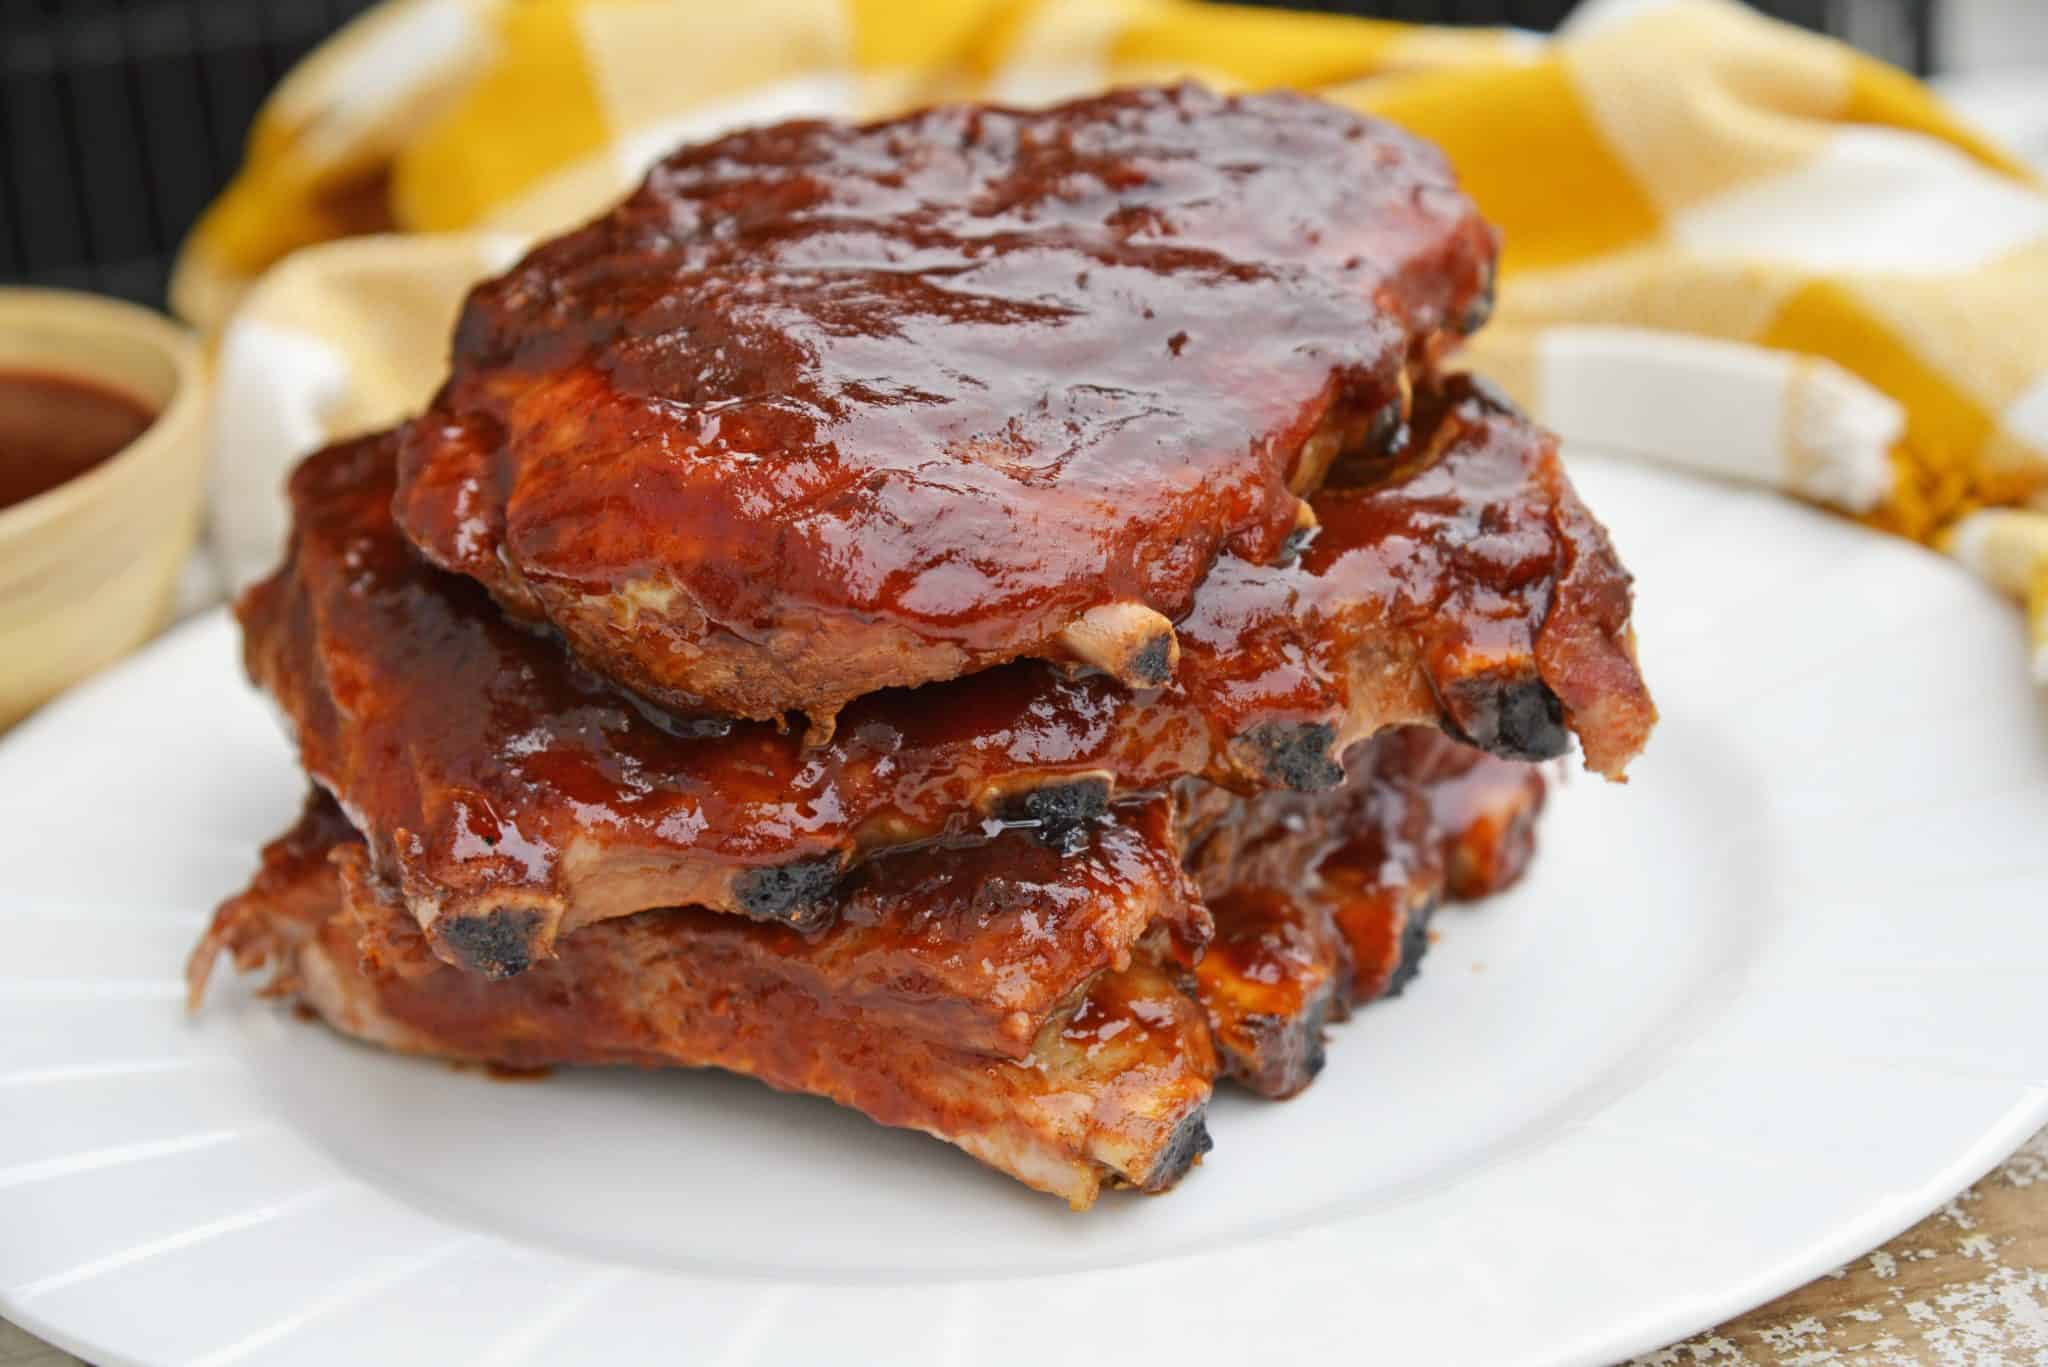 Best Bbq Ribs Recipe How To Make Ribs On The Grill,What Are Potstickers Served With